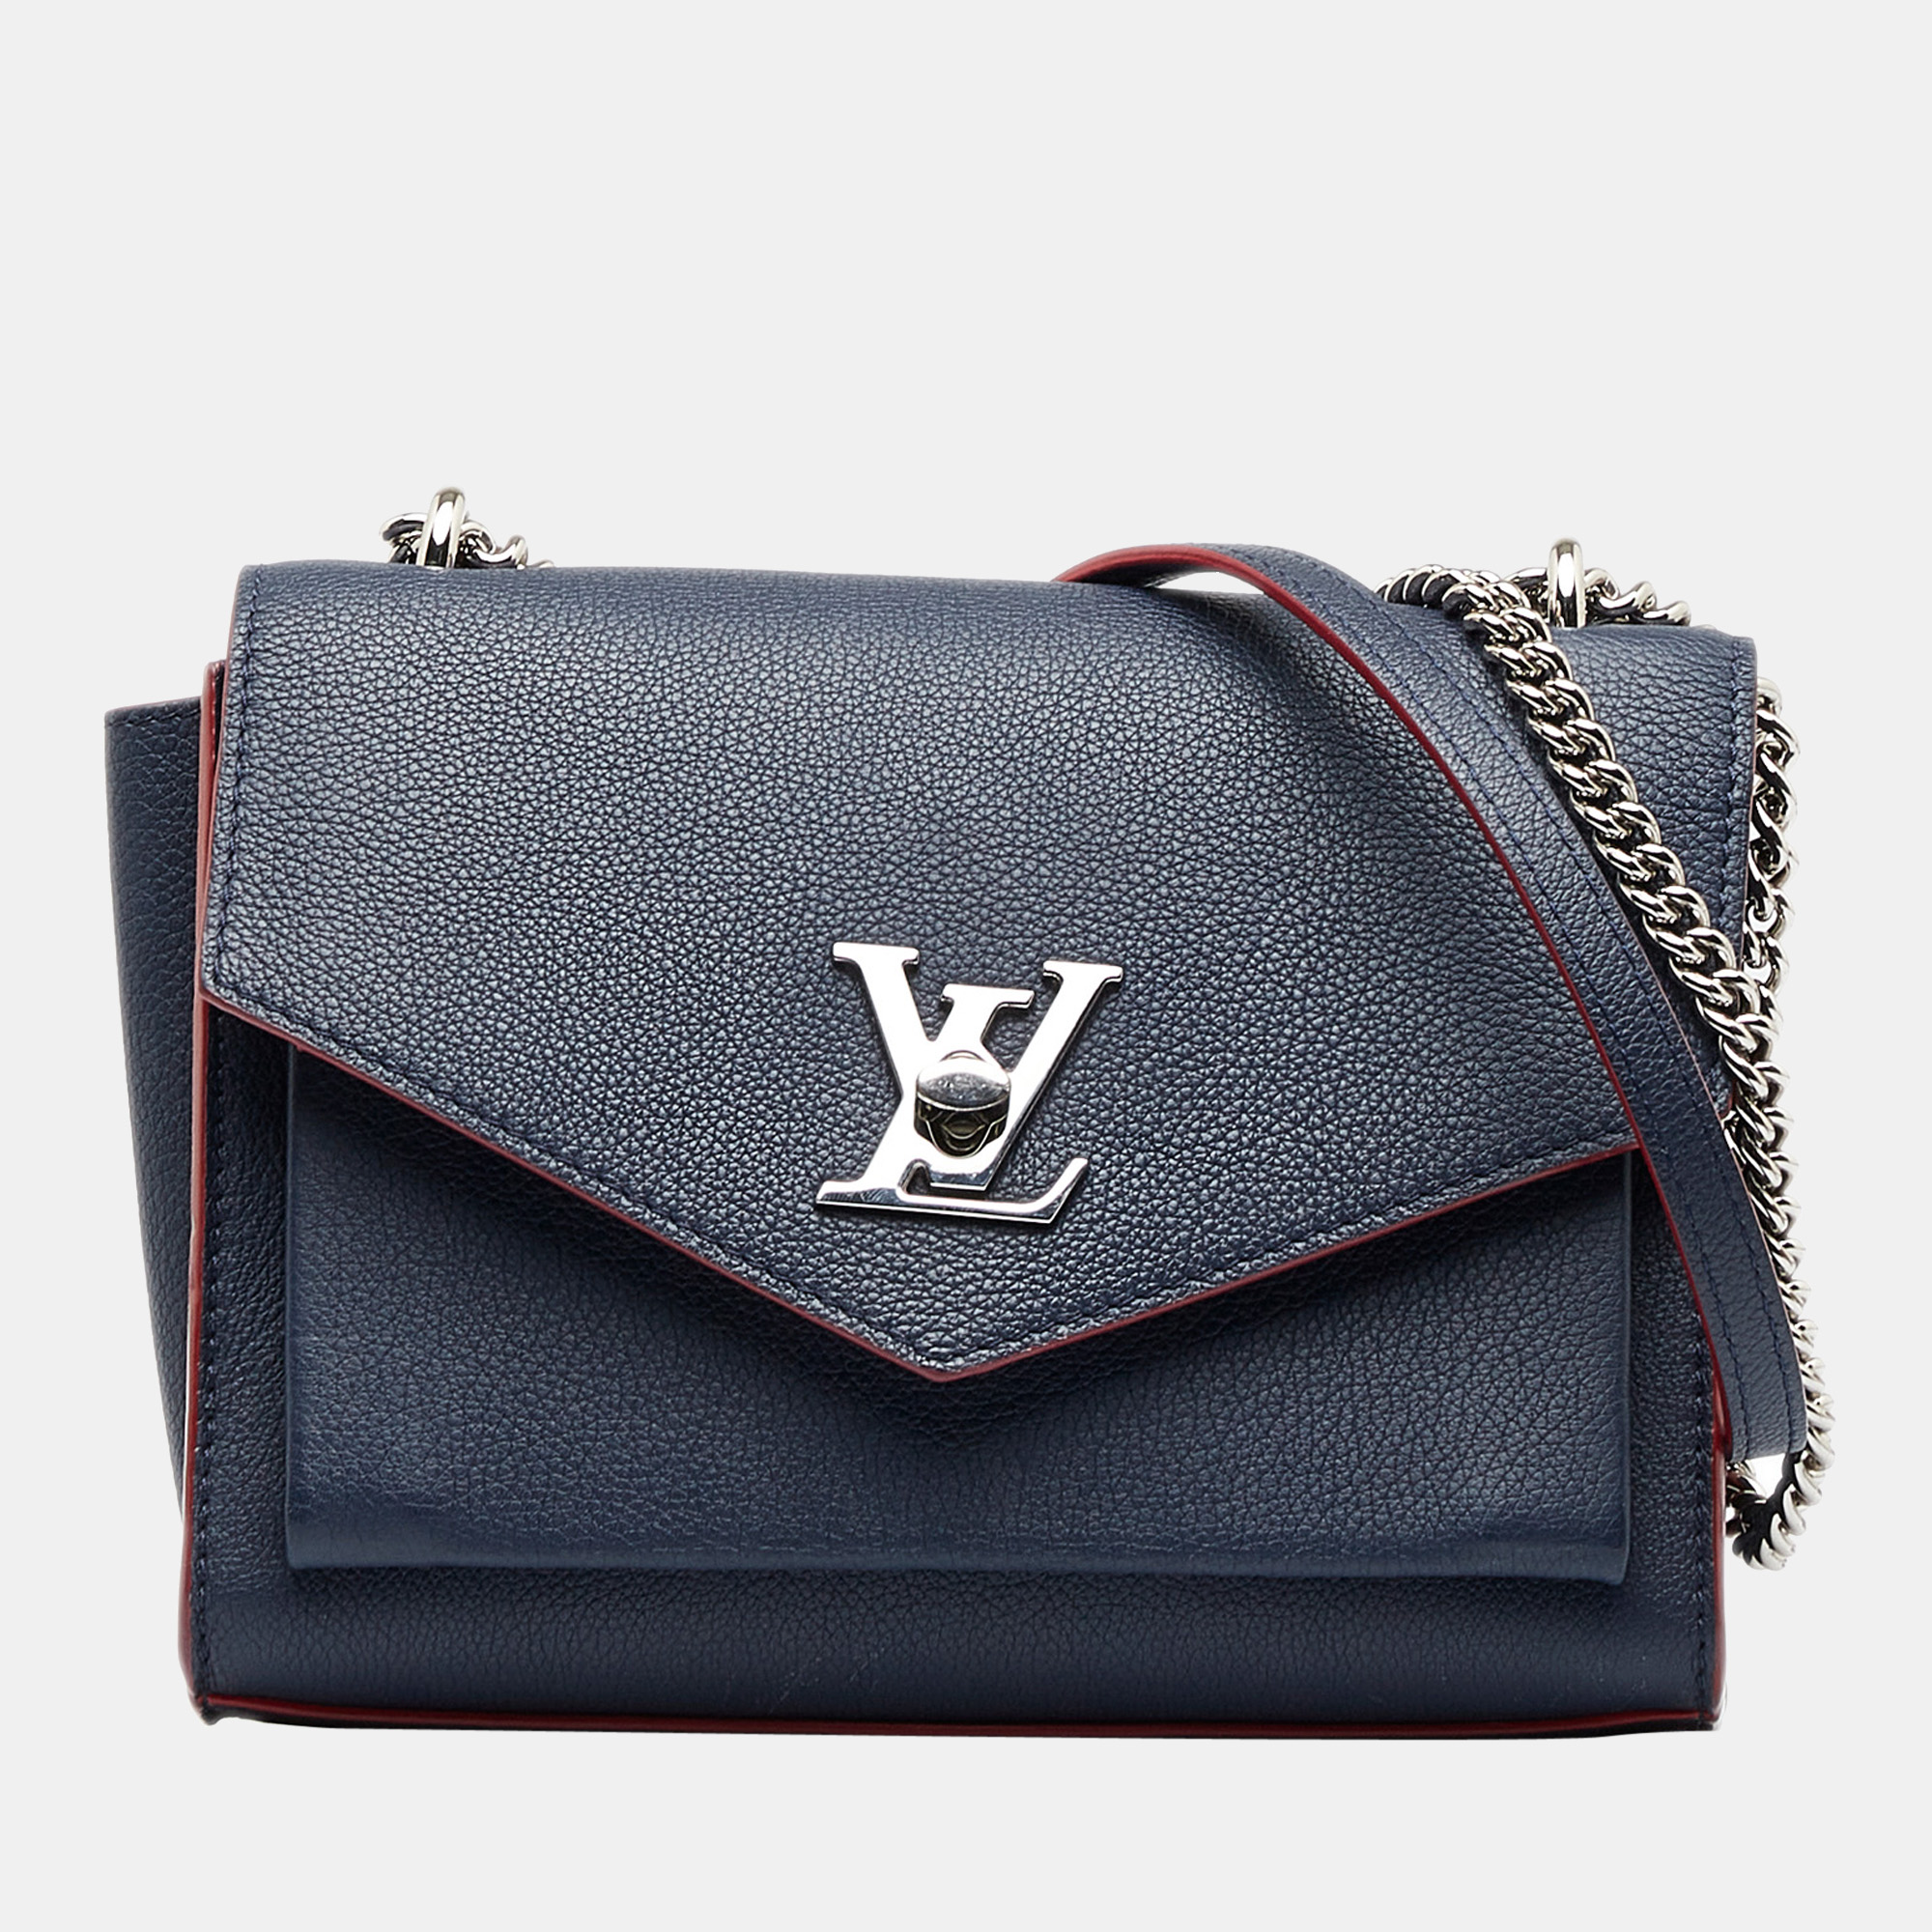 Louis Vuitton Lockme Navy Leather Tote Bag (Pre-Owned)